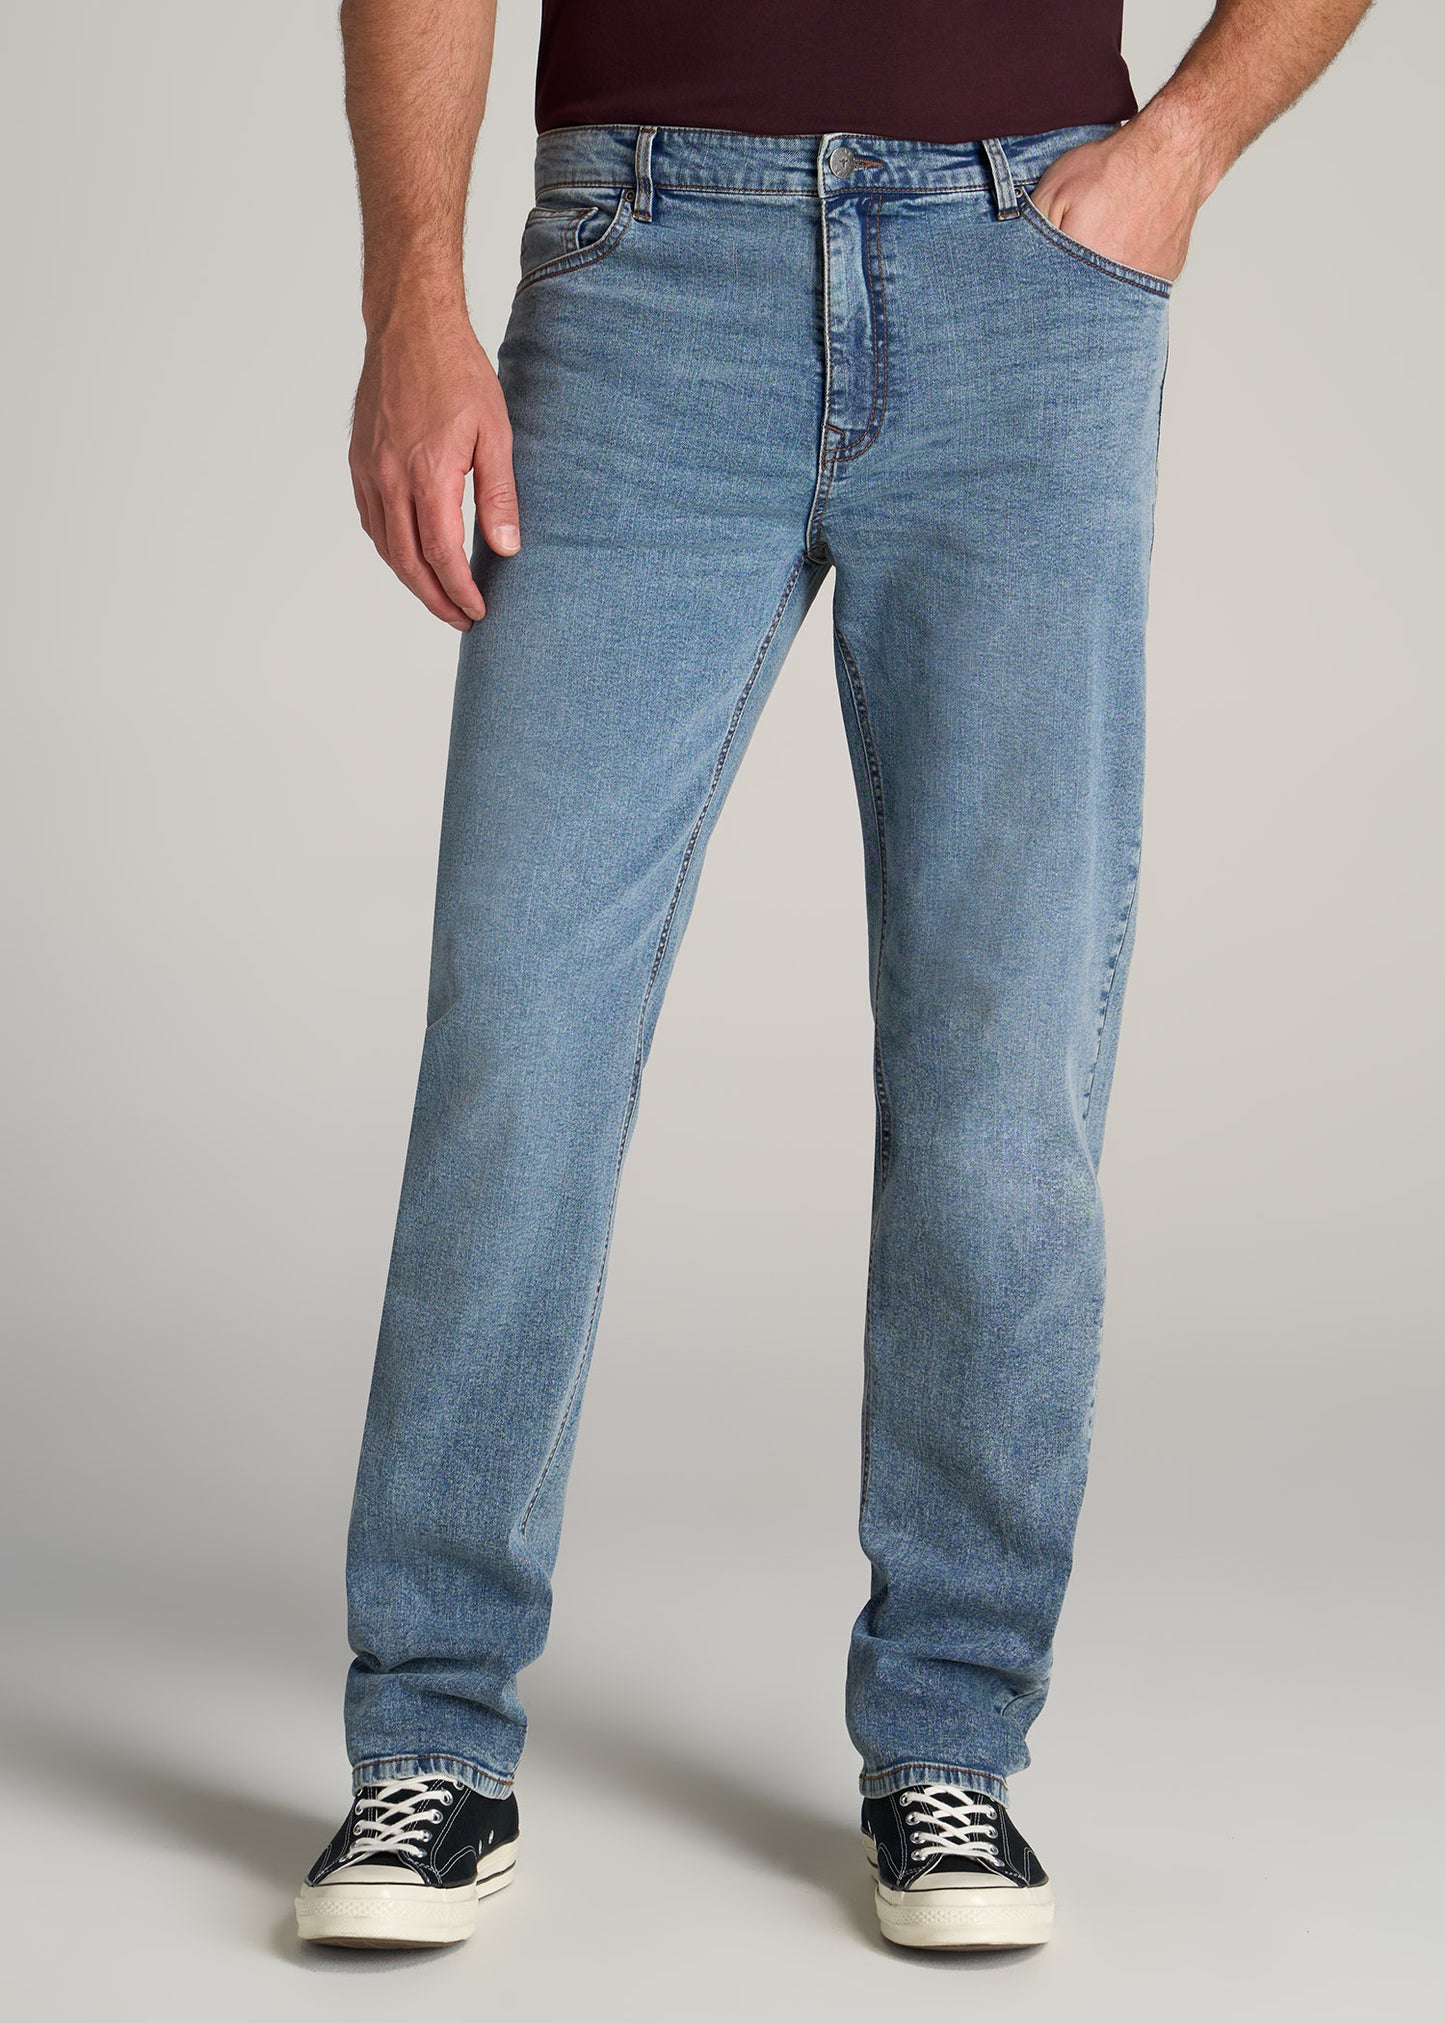       American-Tall-Men-J1-Jeans-Faded-Blue-front